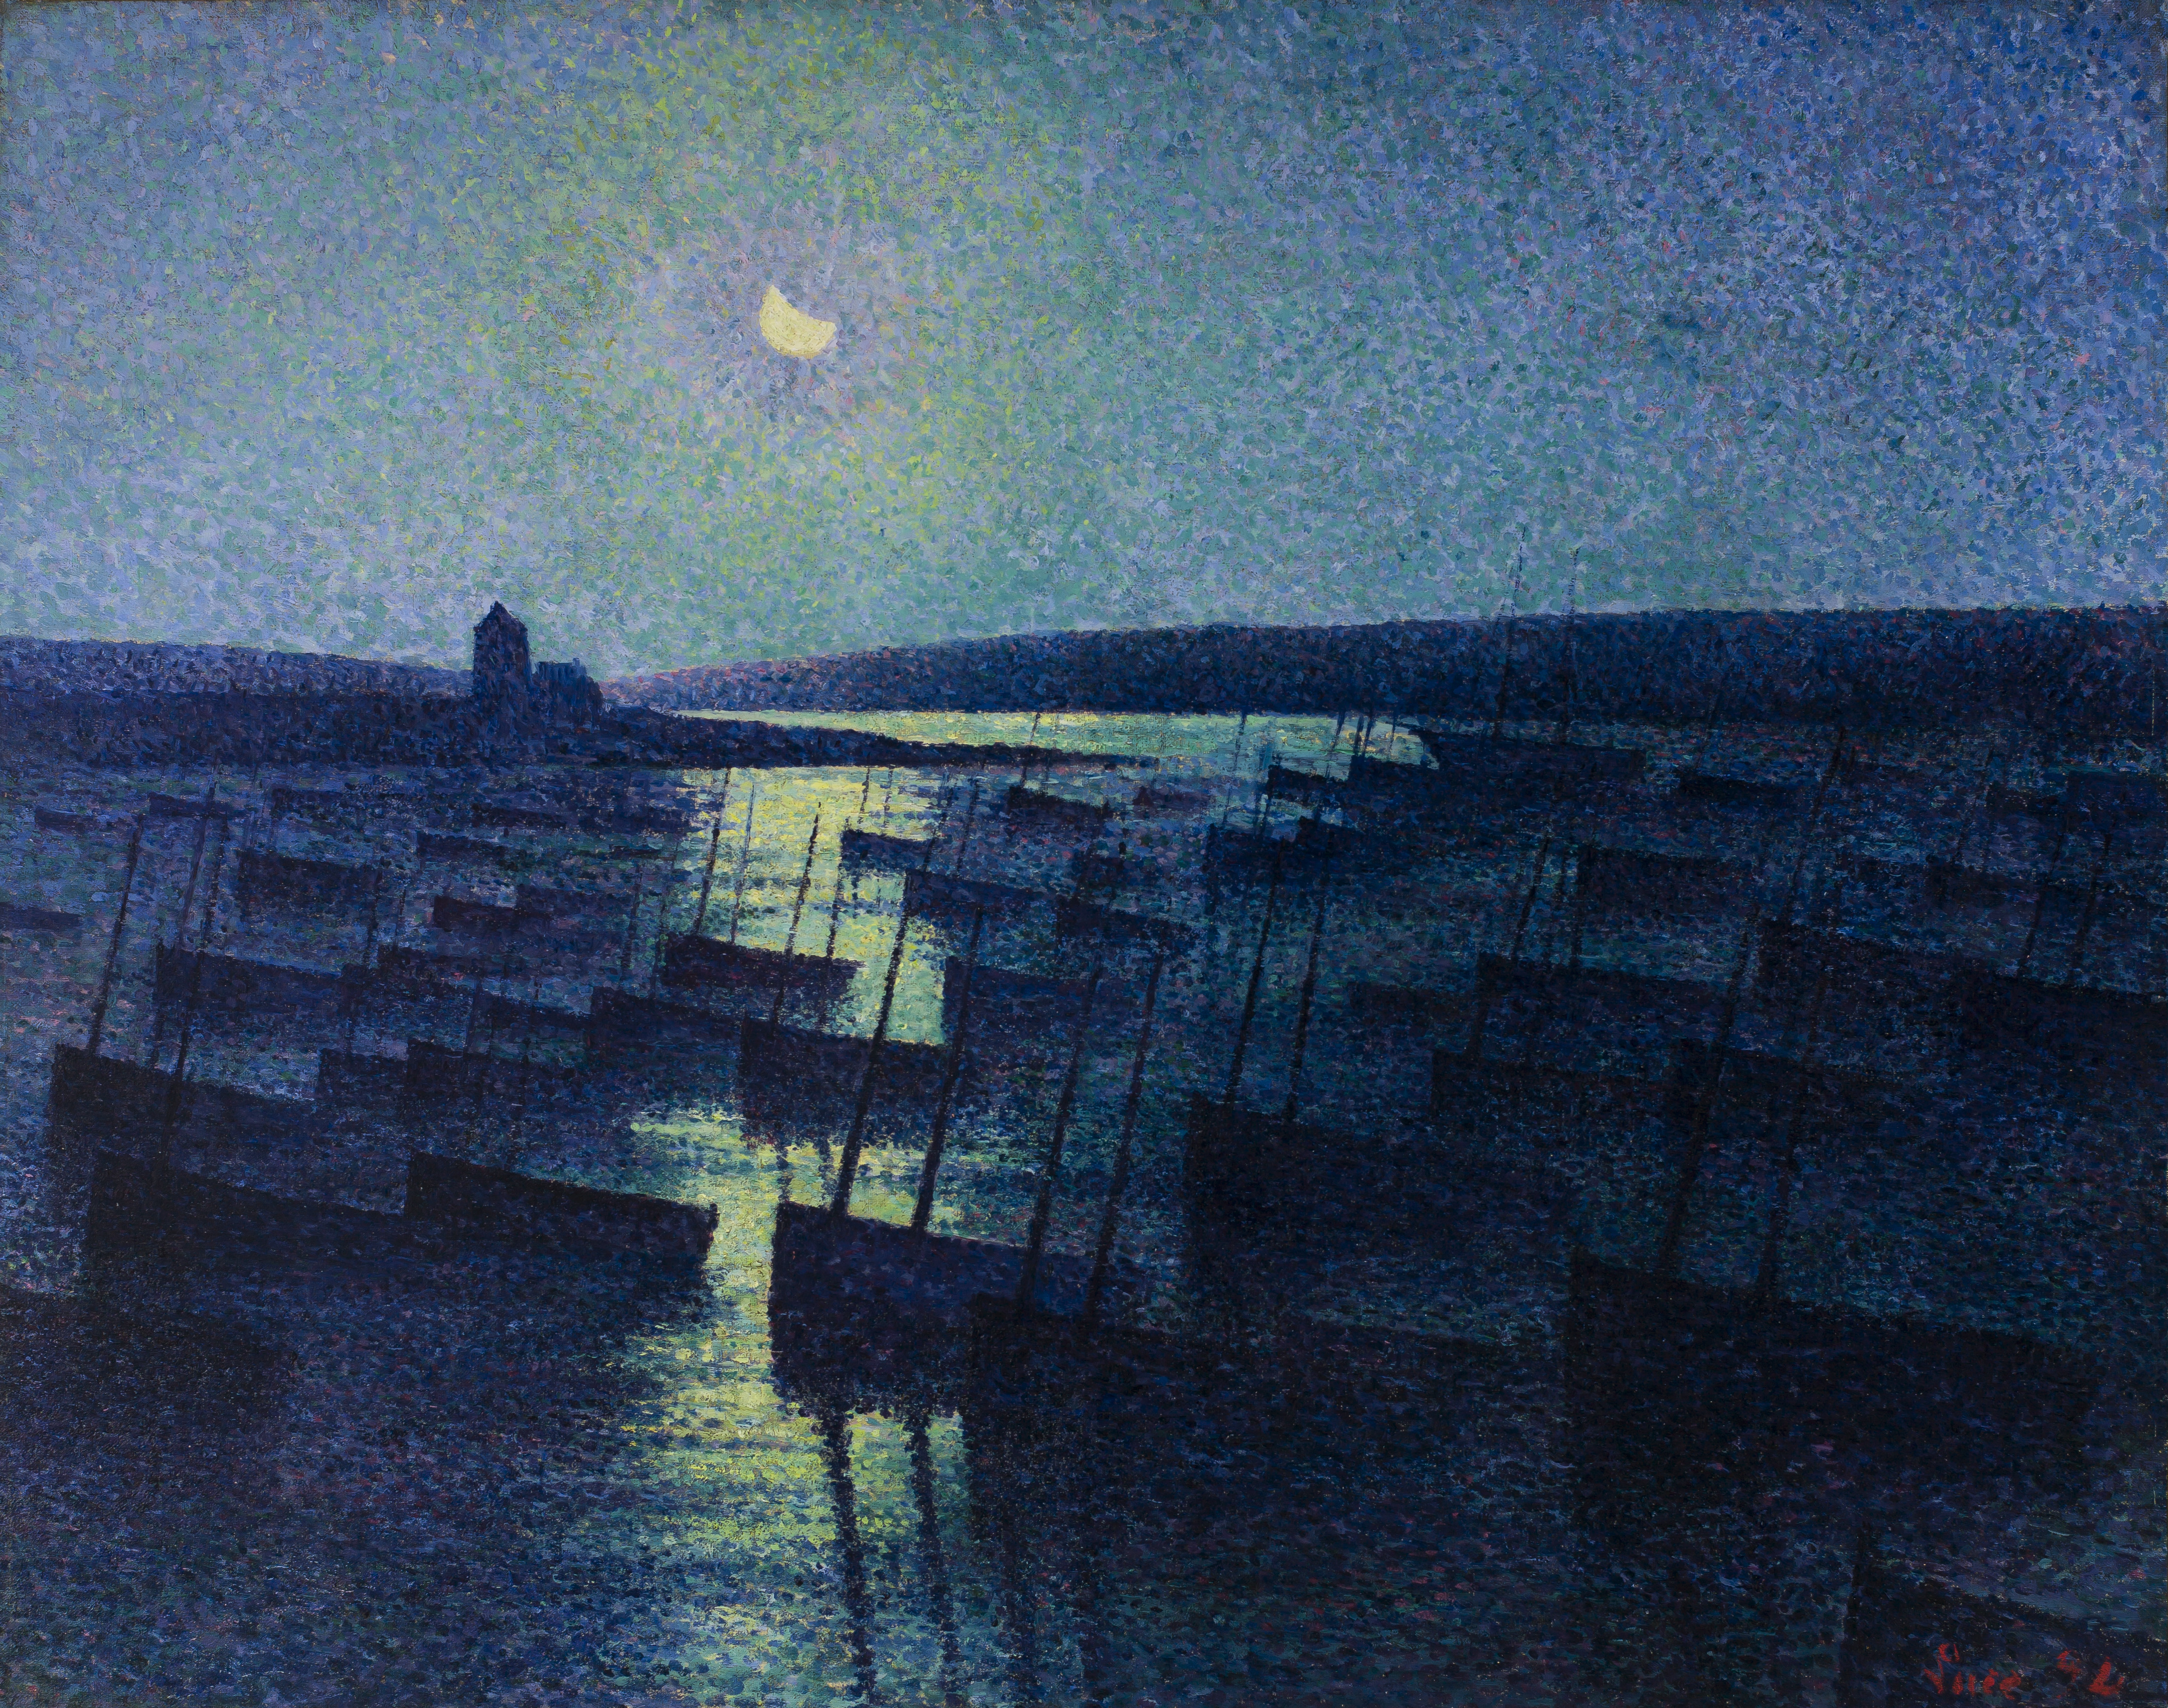 Camaret, Moonlight and Fishing Boats, a painting by Maximilien Luce.